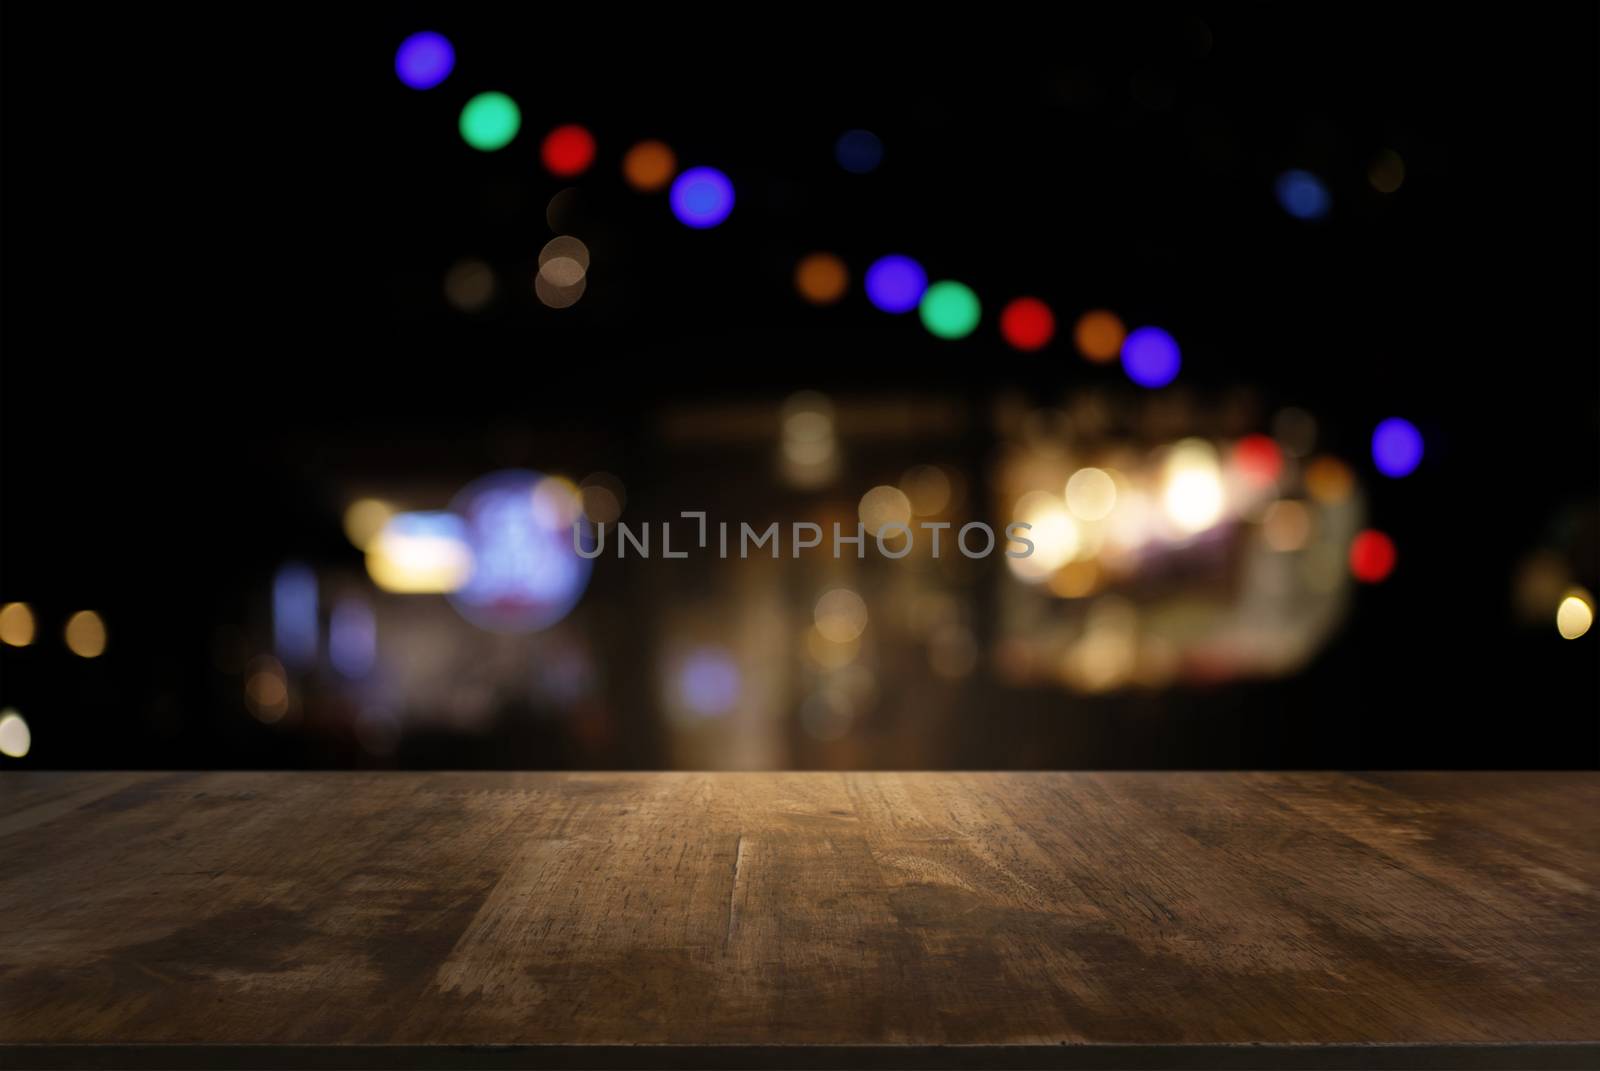 Empty of dark wooden table in front of abstract blurred background of bokeh light . can be used for display or montage your products.Mock up for display of product.